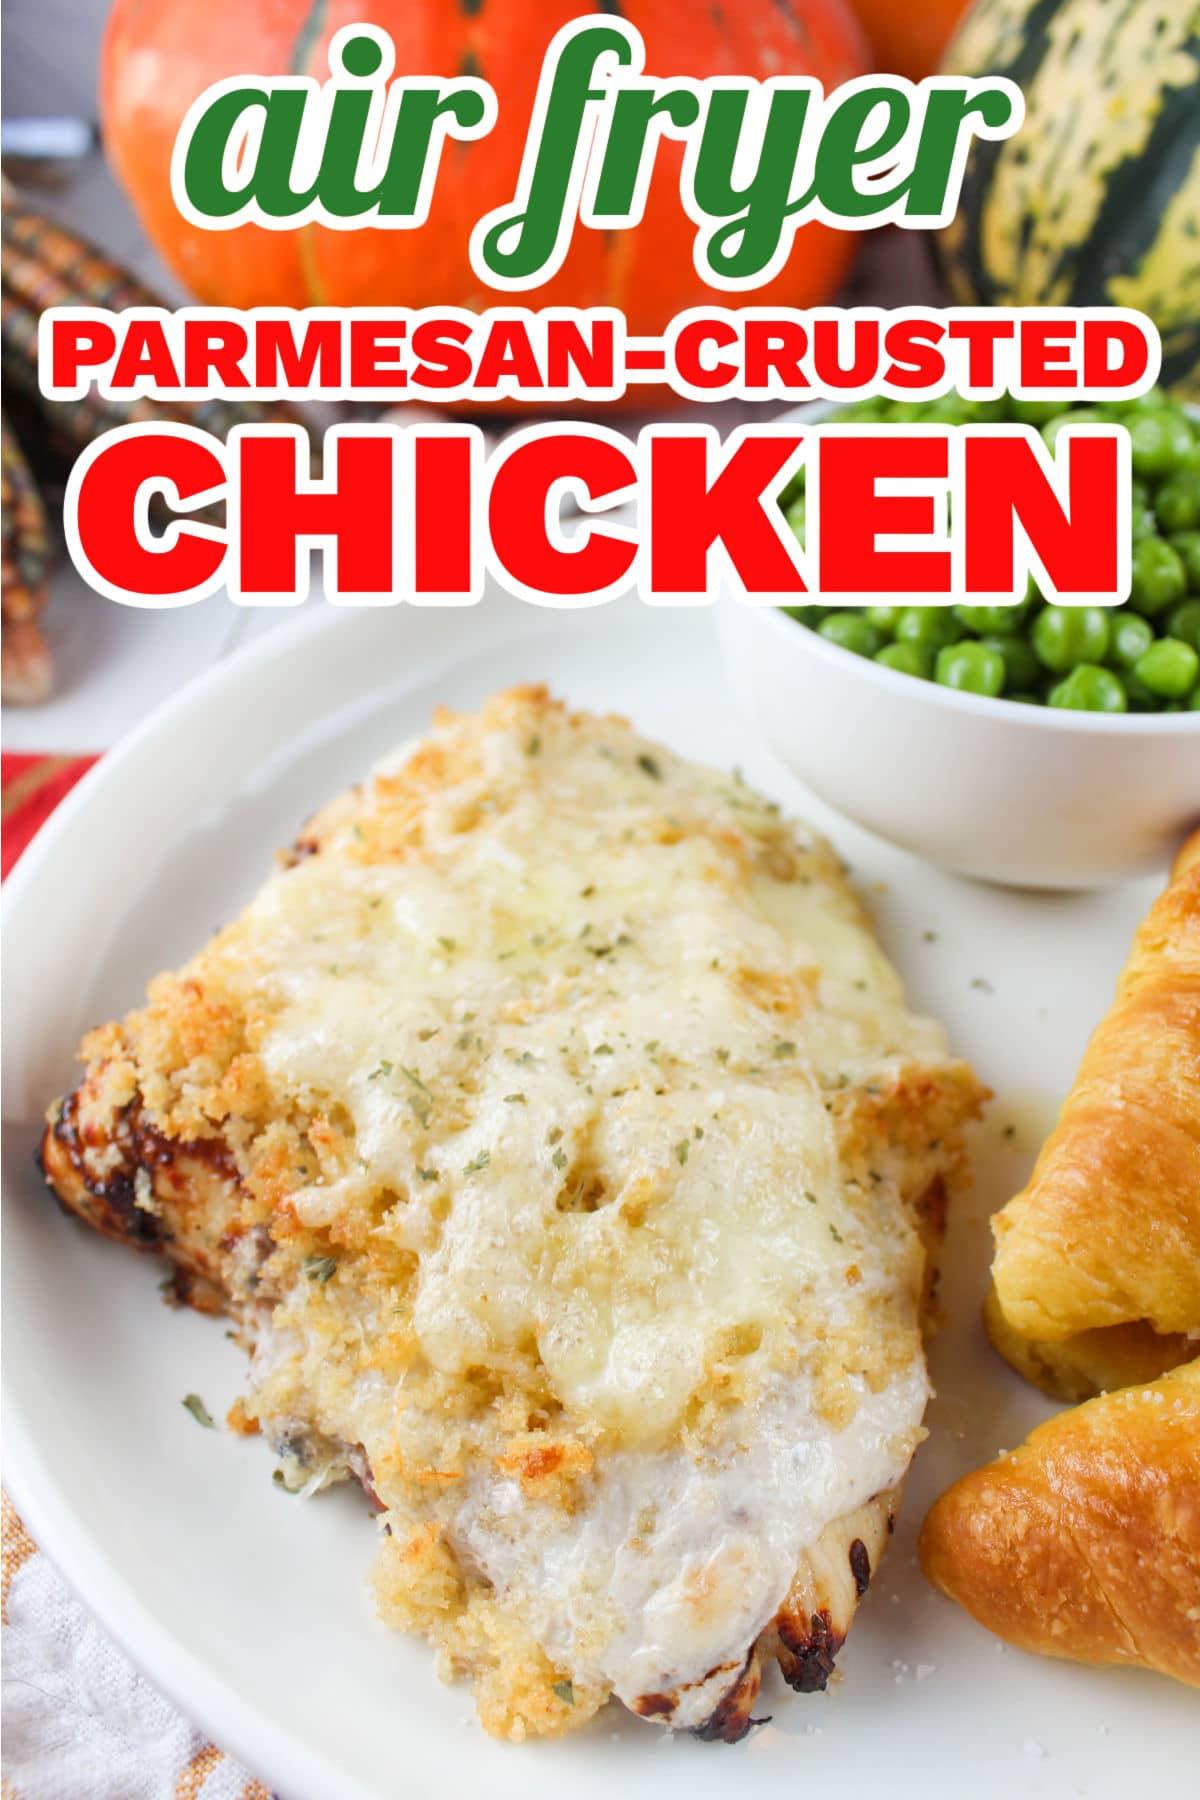 Making Parmesan Crusted Chicken in the Air Fryer is so simple and dinner is ready in 20 minutes! Ordinary chicken becomes irresistible when it's topped with a creamy, crunchy Parmesan crust. Plain chicken be gone! via @foodhussy